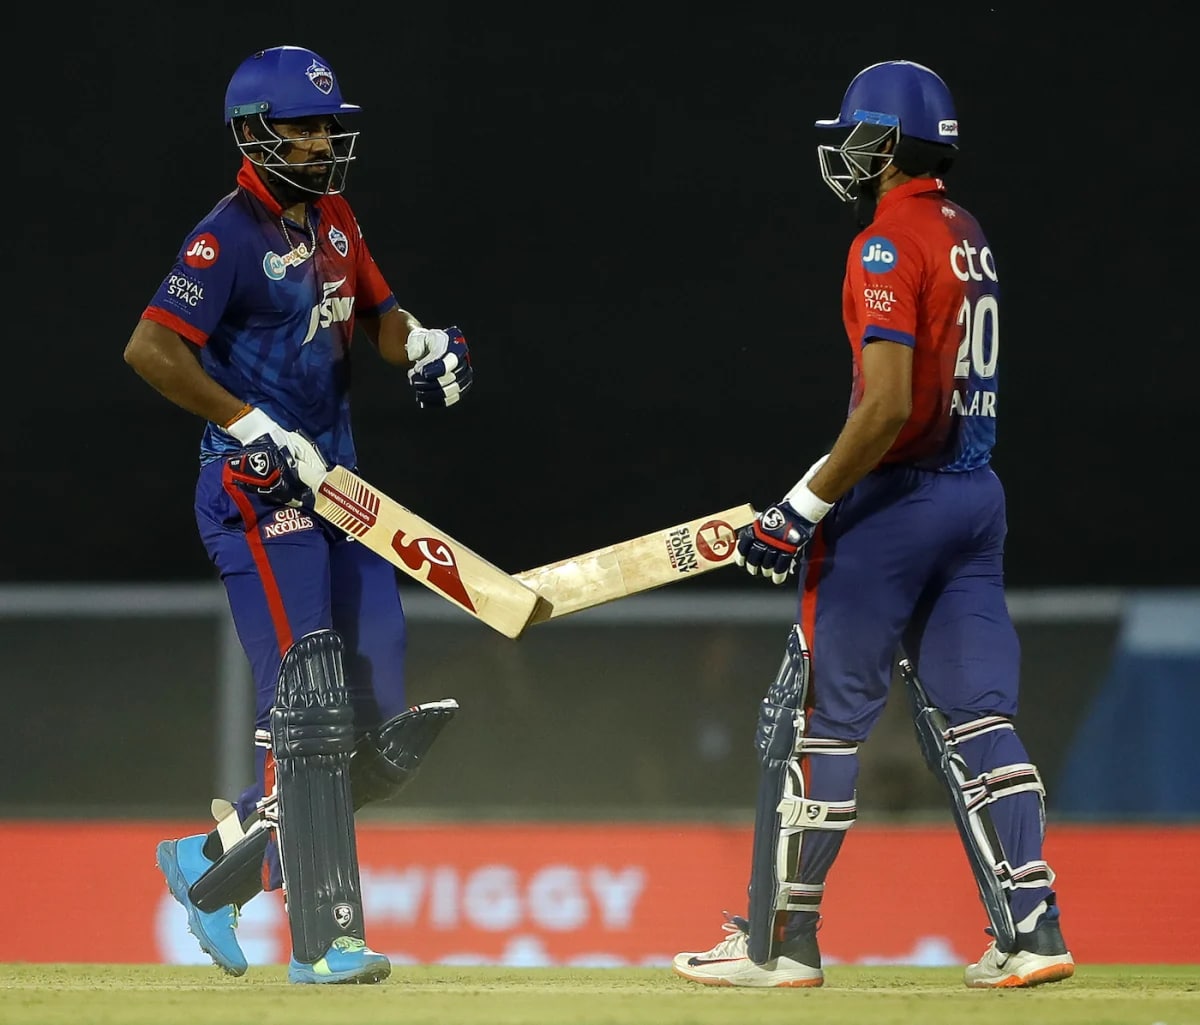 Delhi Capitals won by 4 Wickets against Mumbai Indians